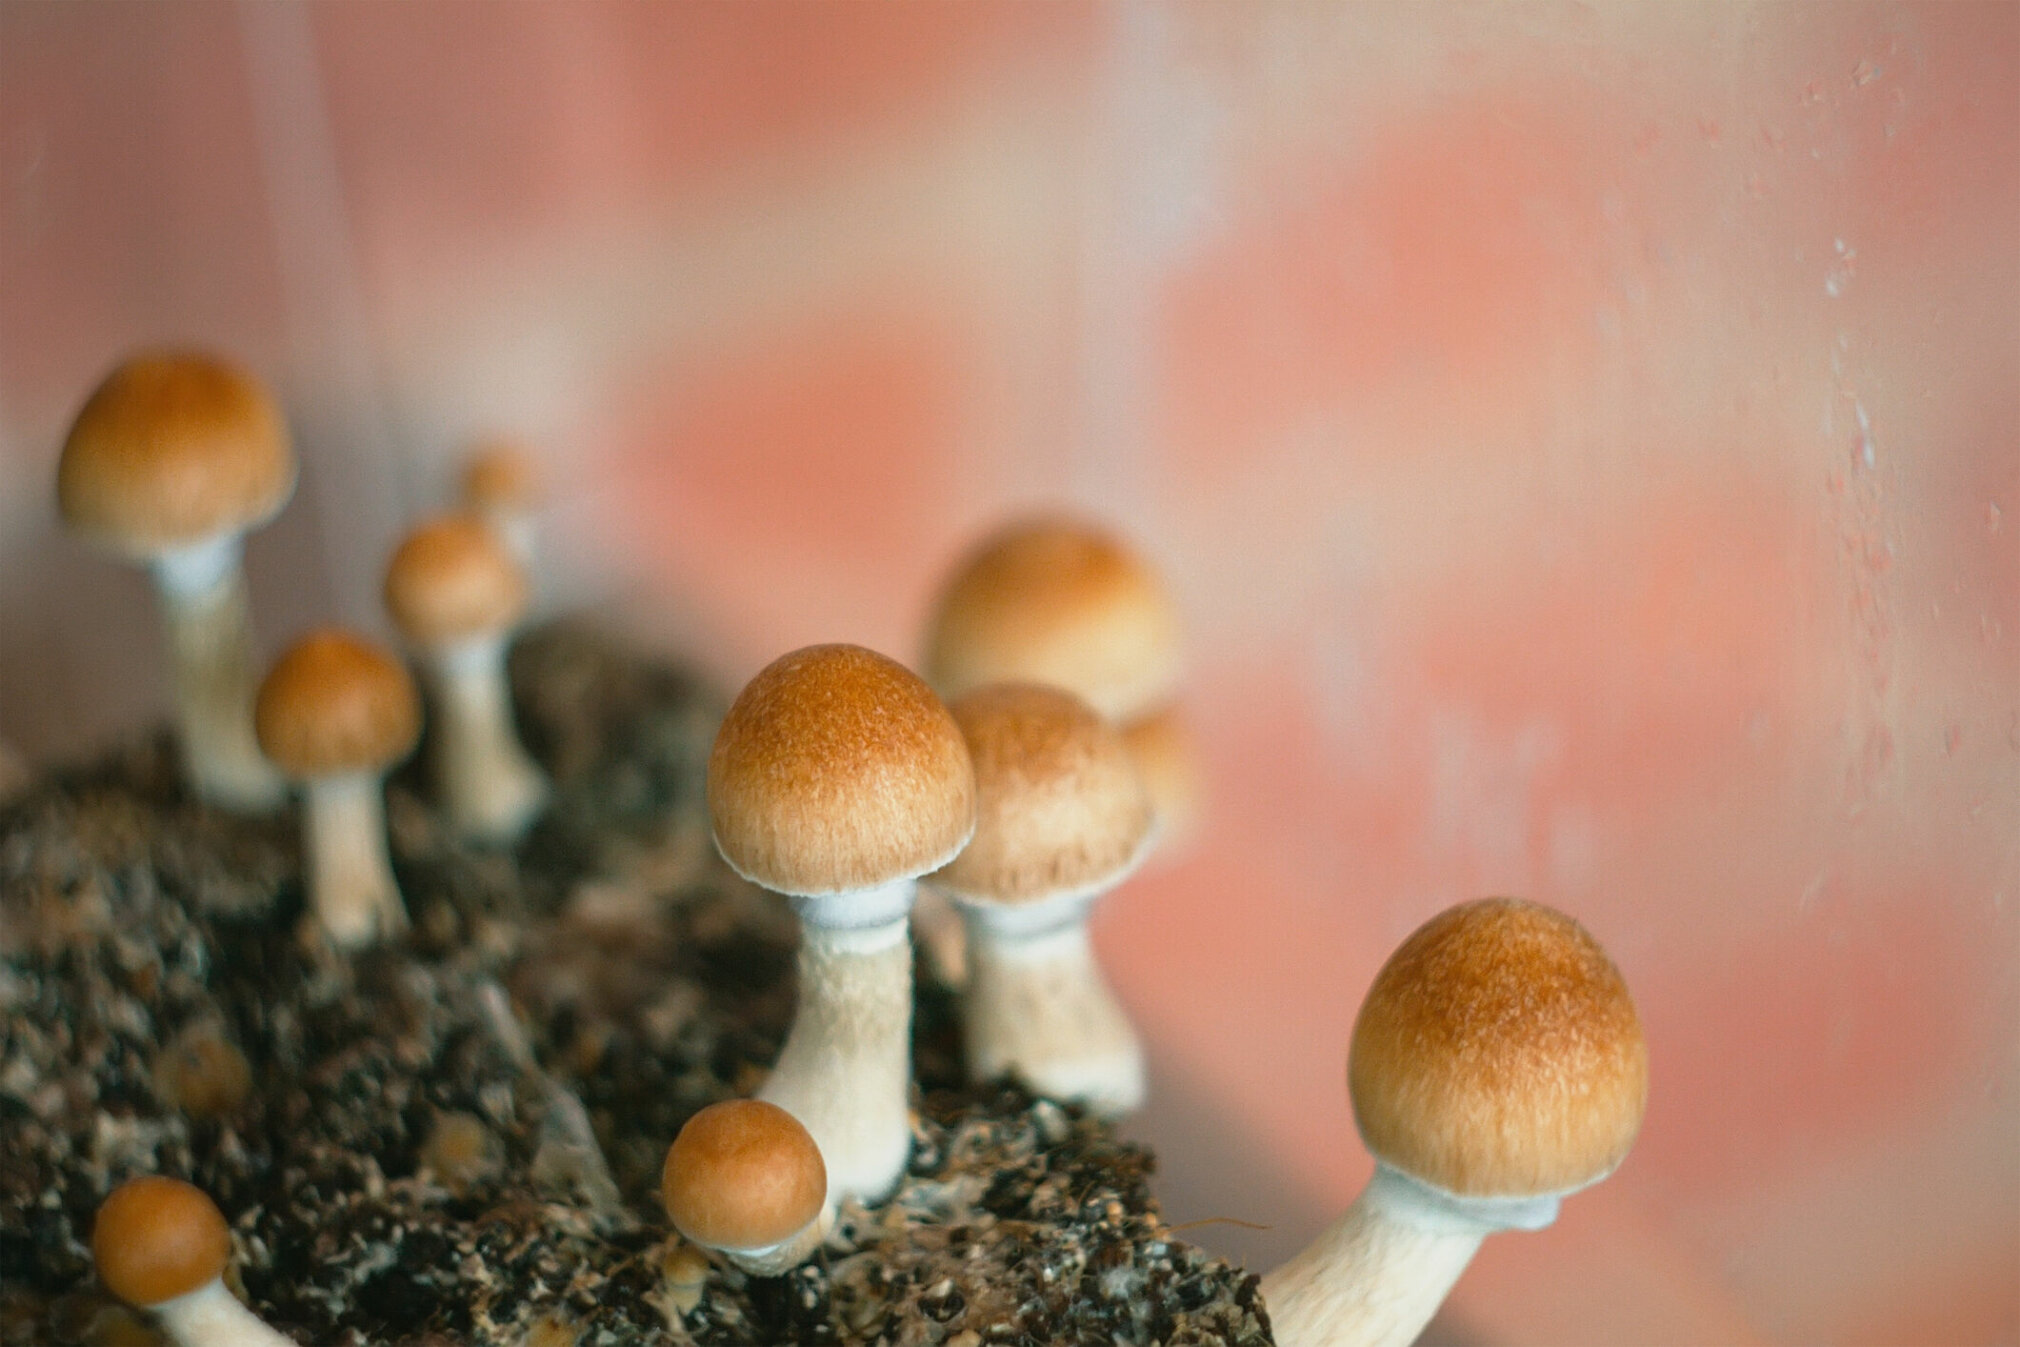 ‘Magic mushrooms’ could help cancer patients with depression